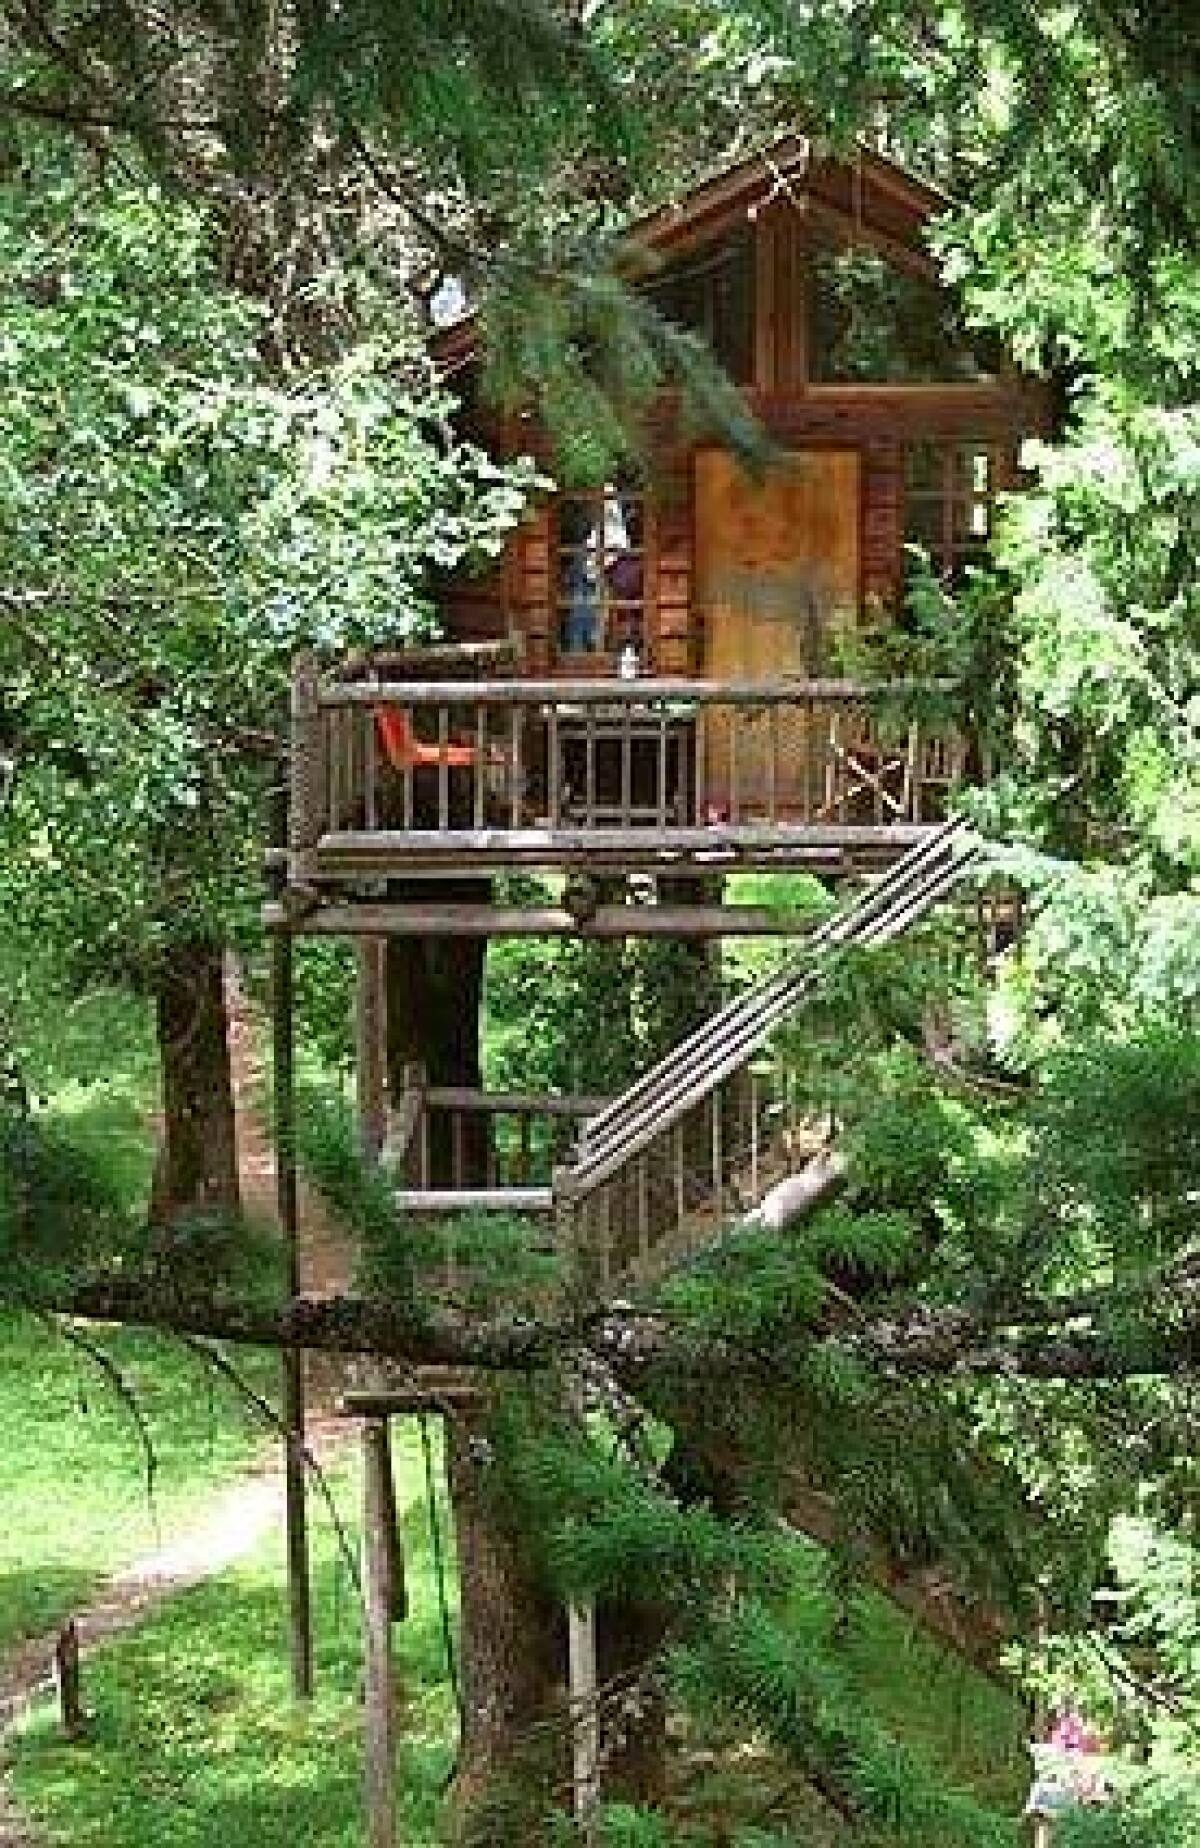 Peacock Perch is one of 11 treehouses guests can rent at Out n About Treesort in Oregons Siskiyou Mountains, about 20 miles from the California border. The resorts bathhouse pavilion is on the ground level.